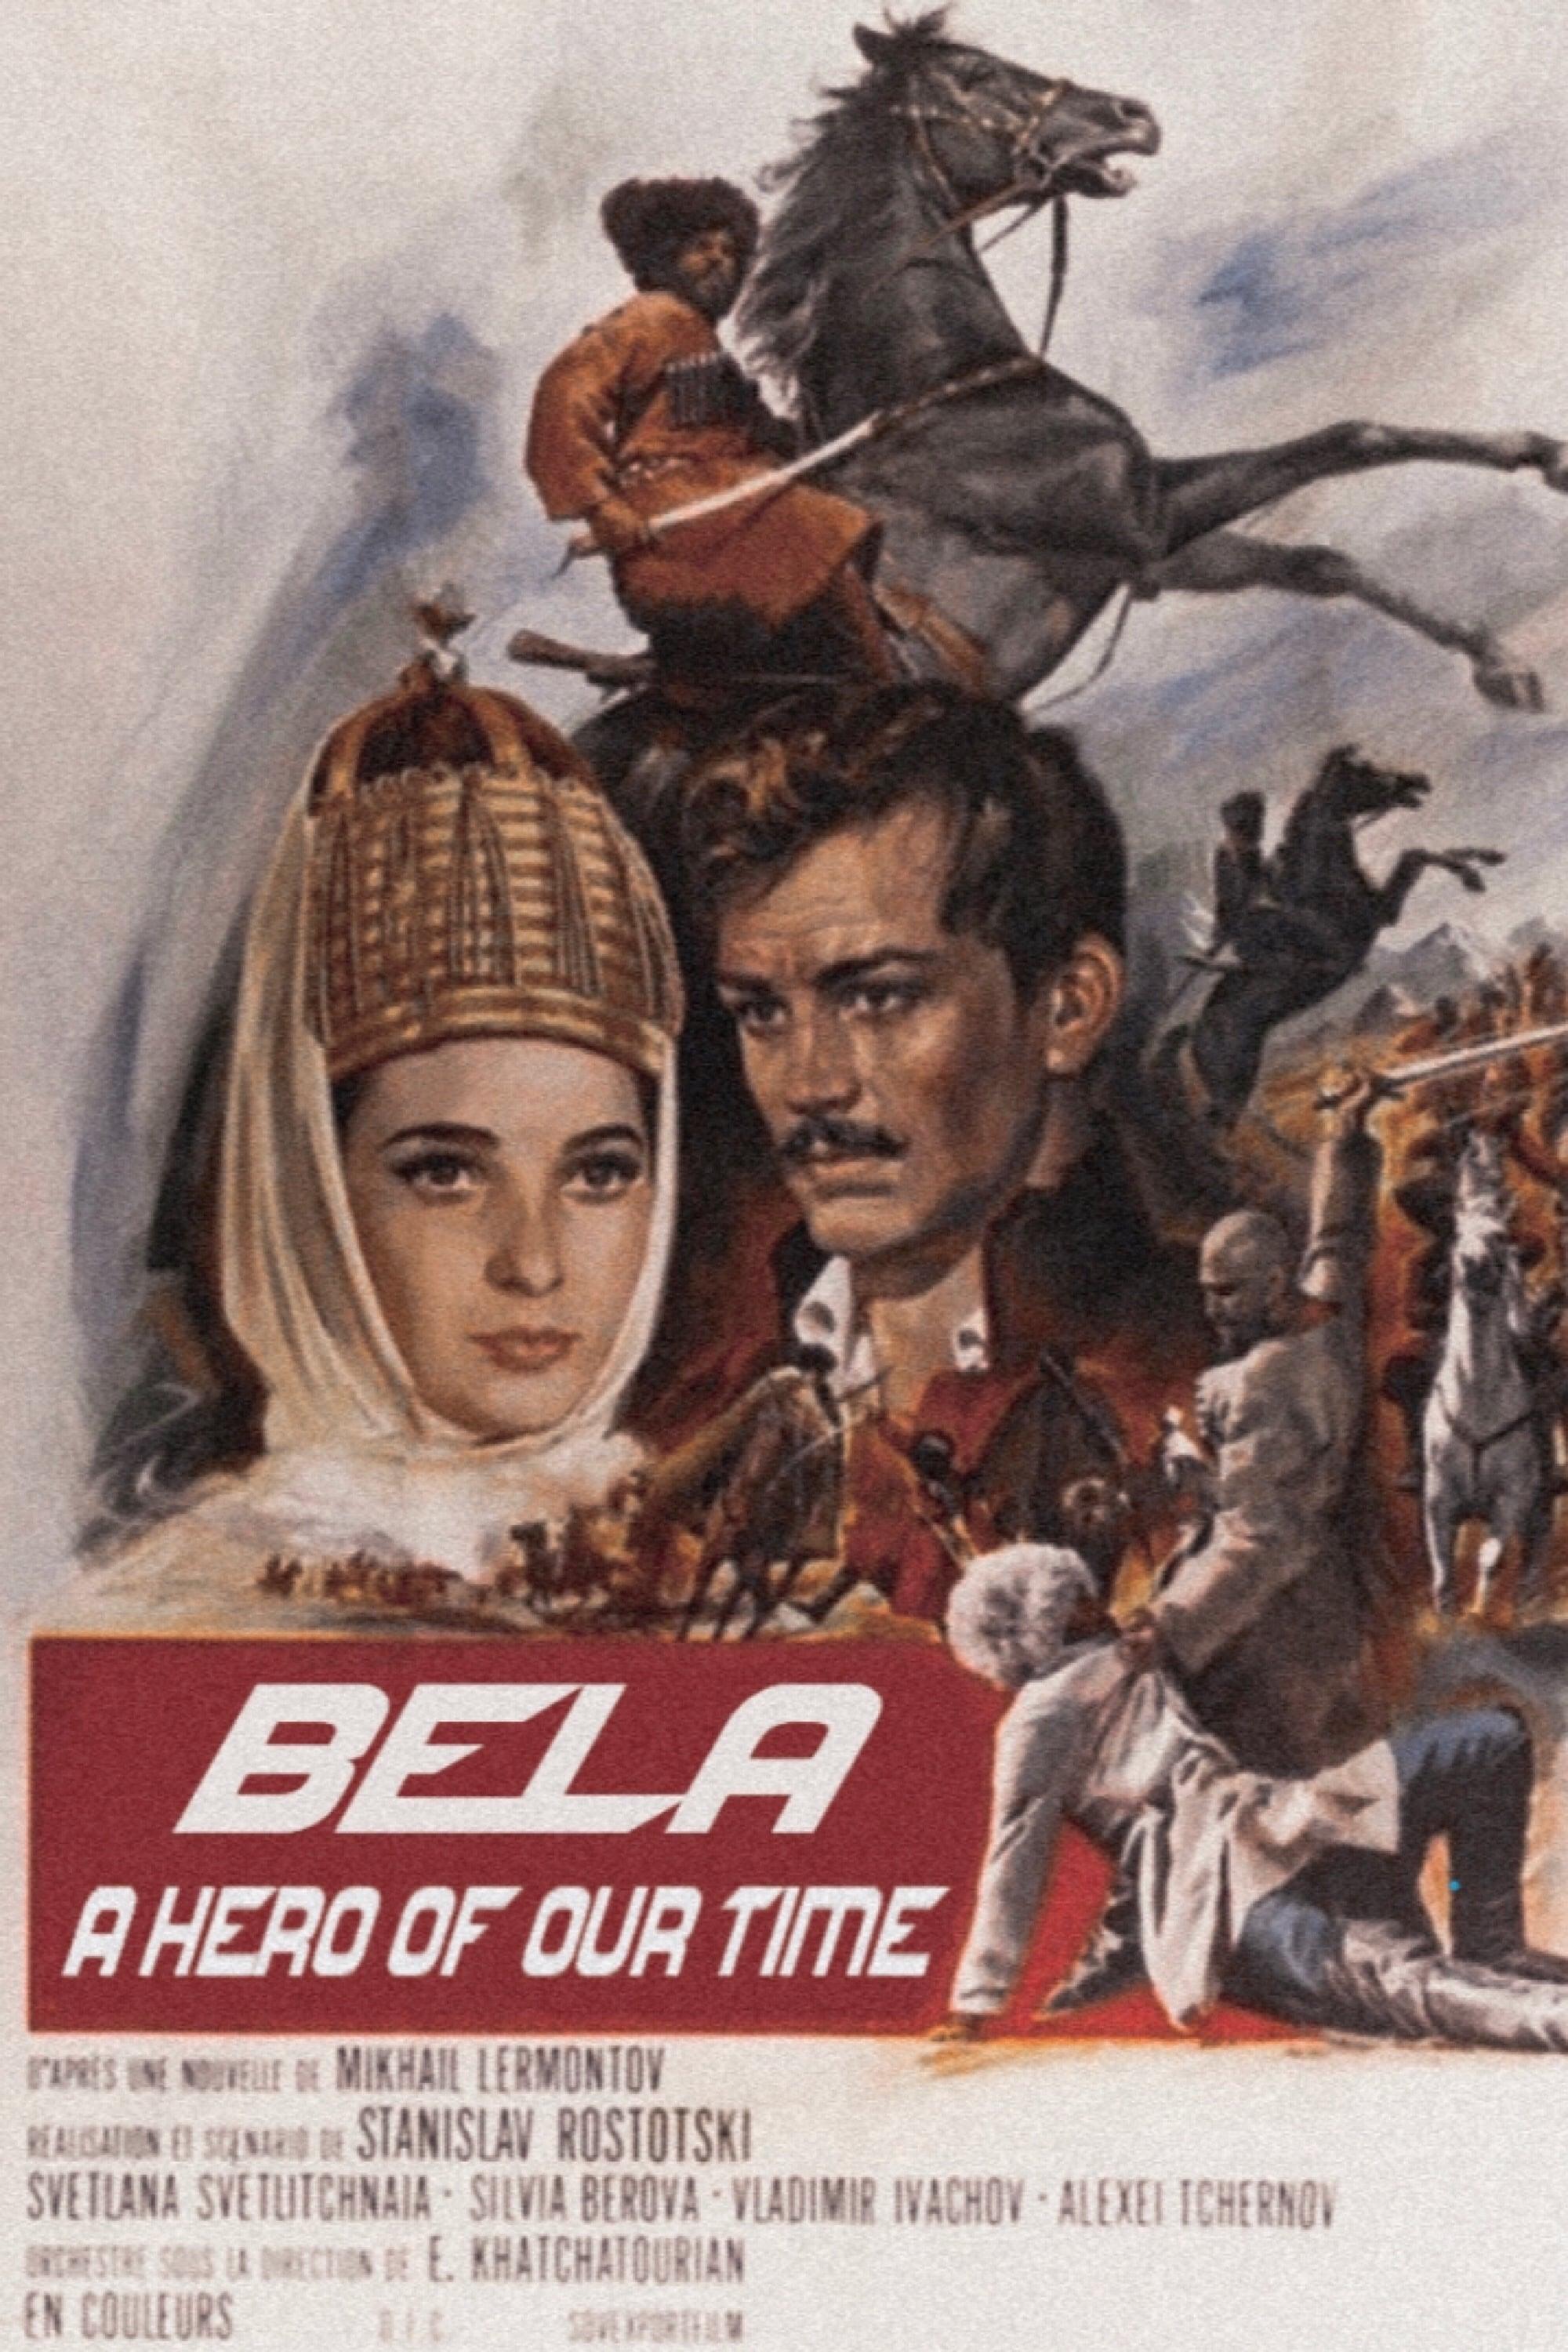 A Hero of Our Time: Bela poster